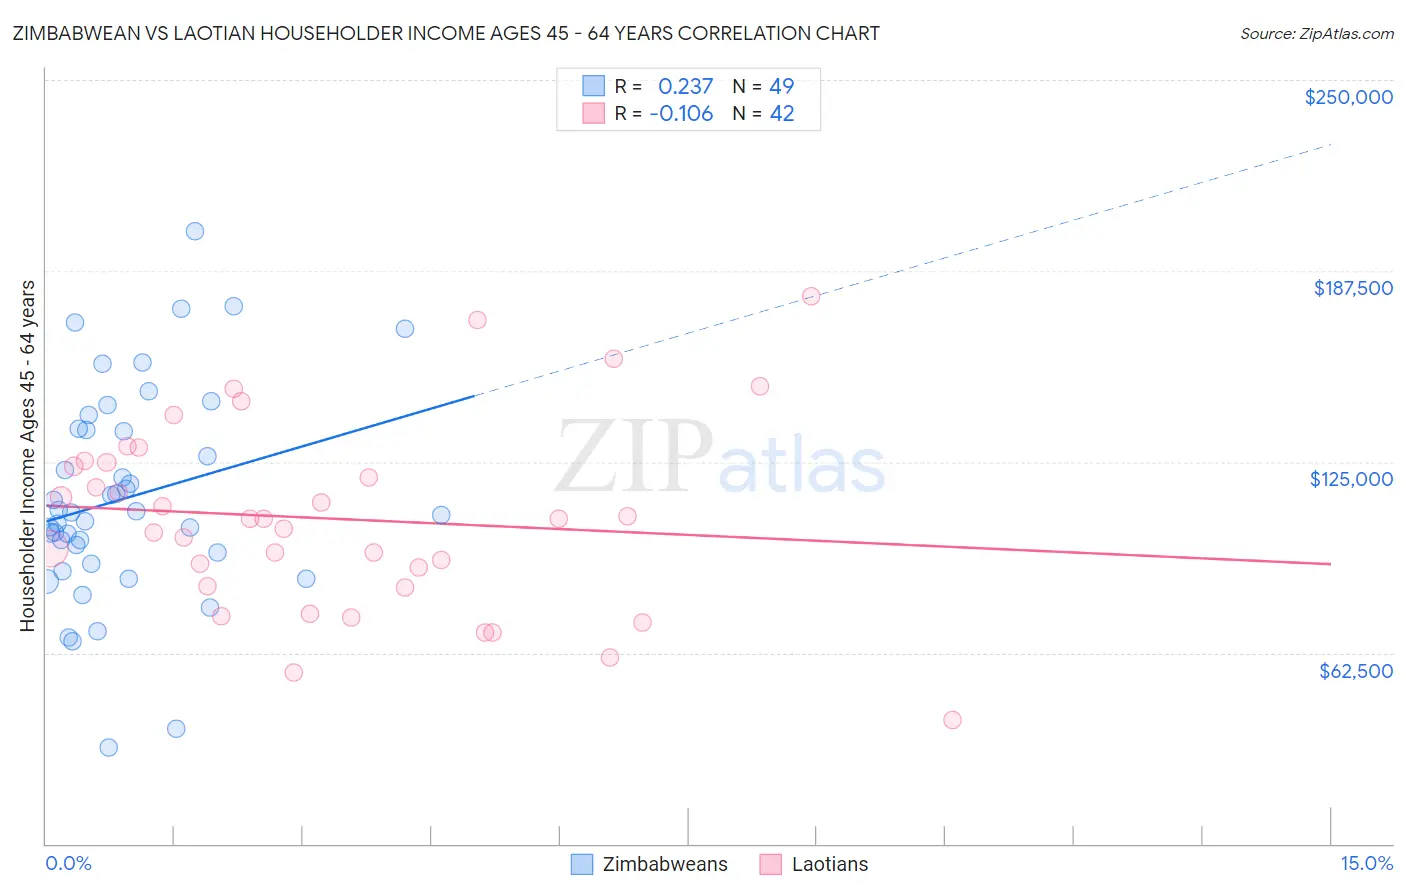 Zimbabwean vs Laotian Householder Income Ages 45 - 64 years